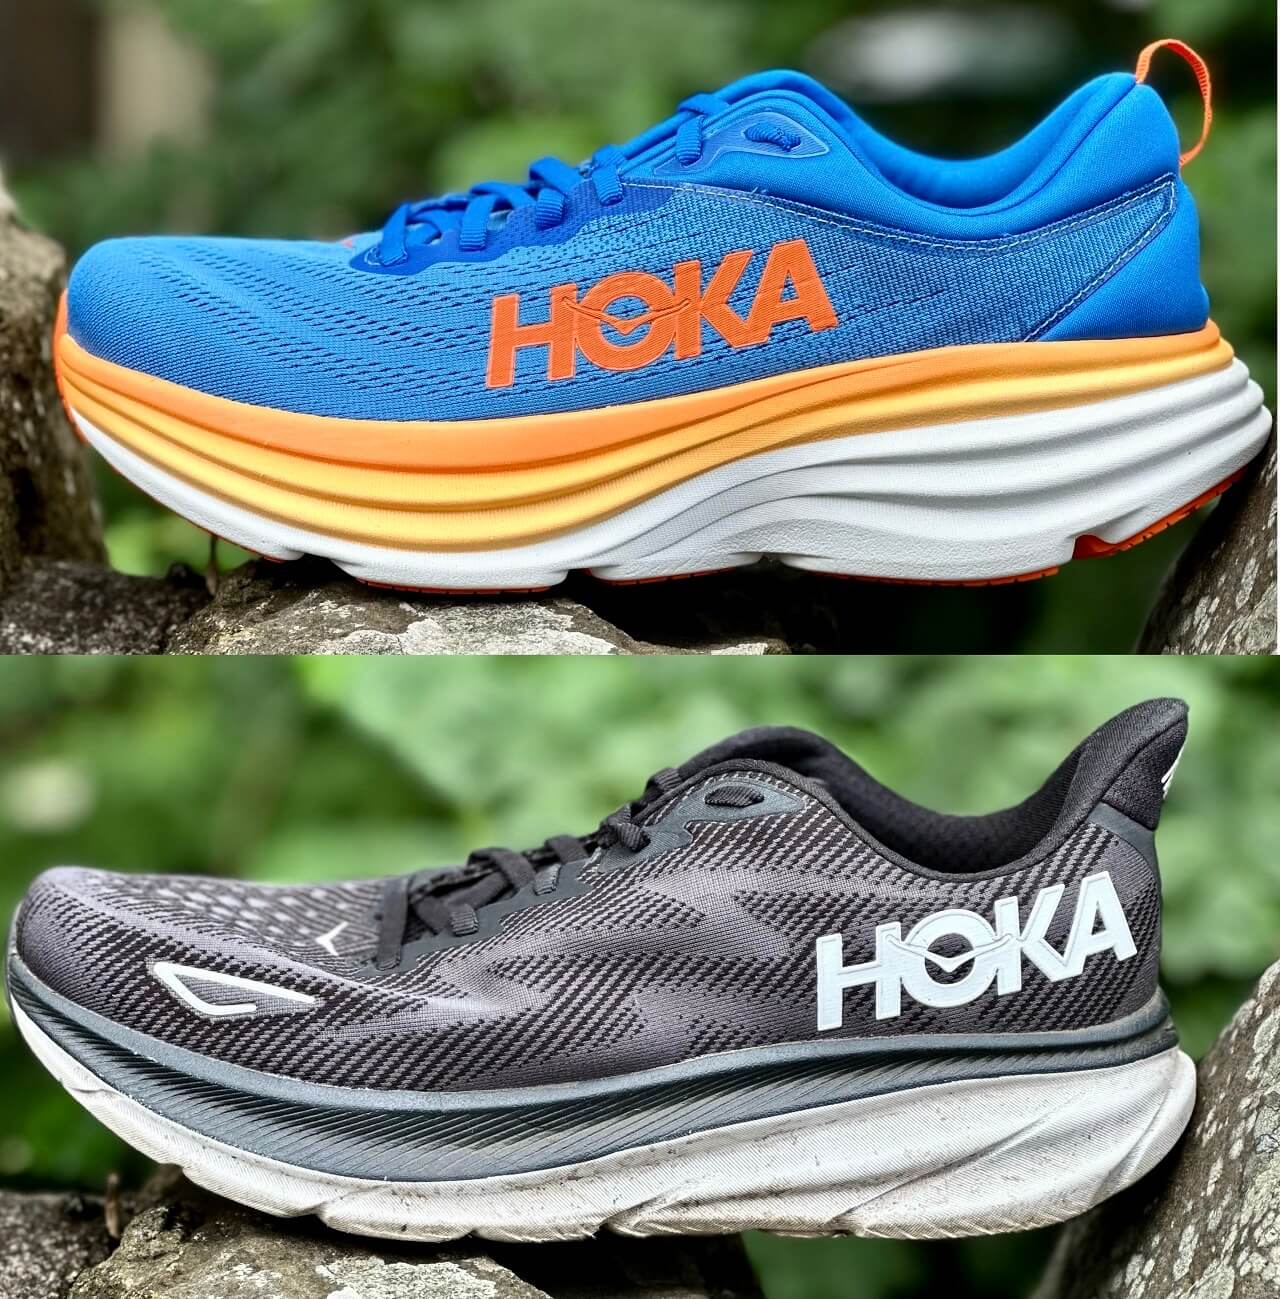 Lateral view of HOKA Bondi and HOKA Clifton road running shoes side by side